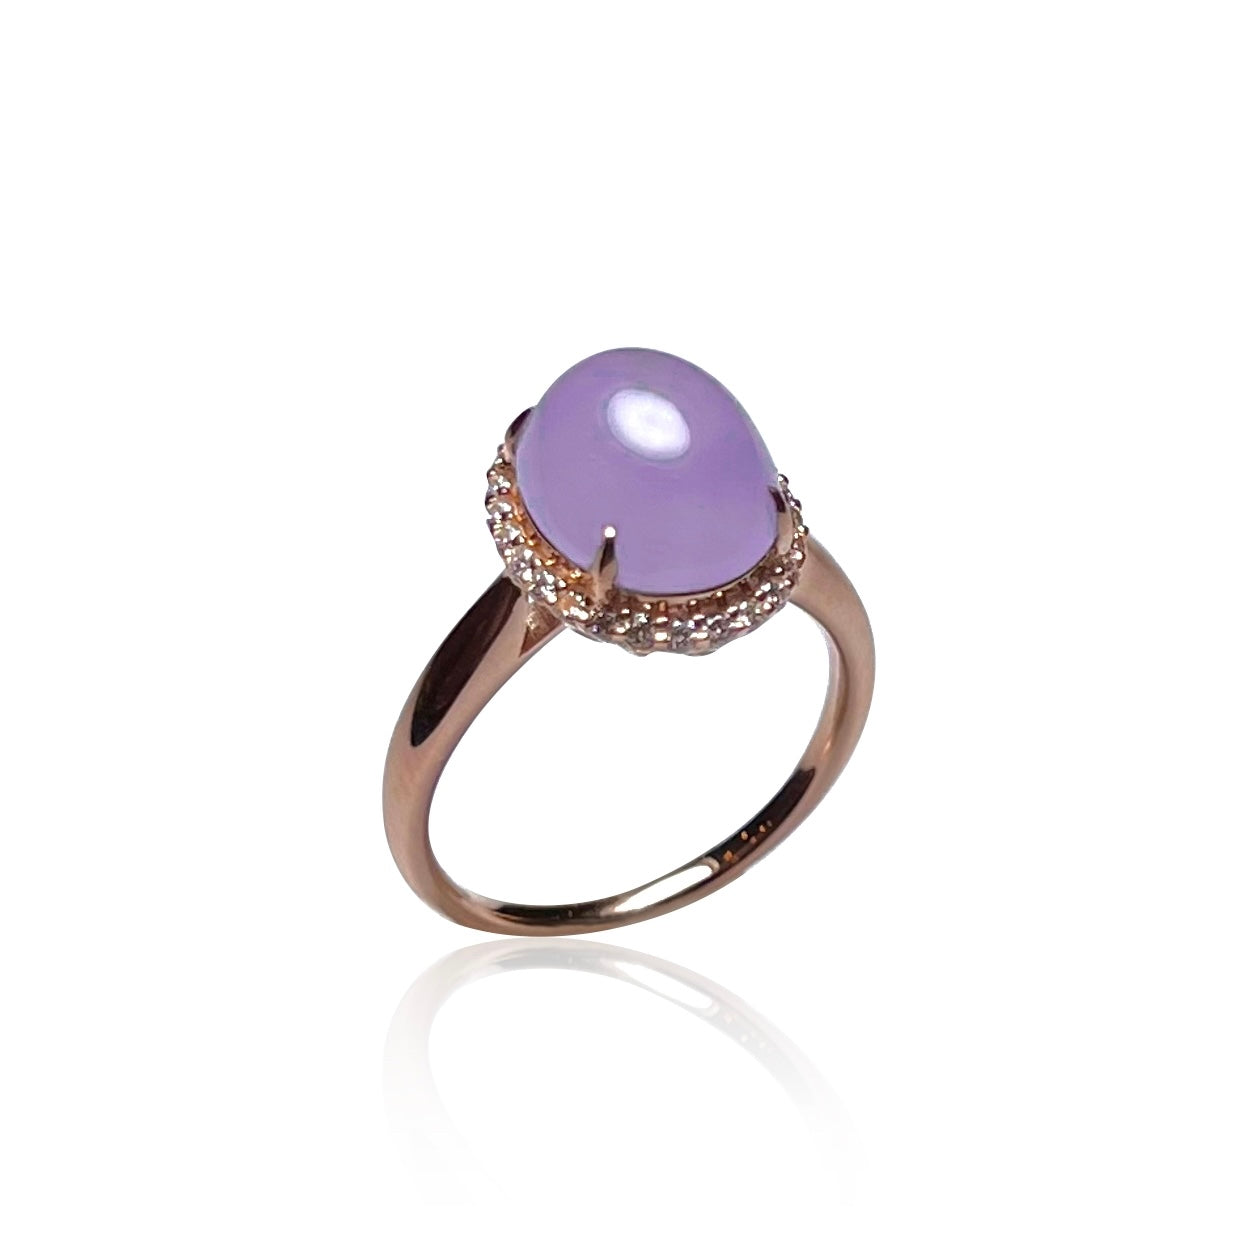 LAVENDER JADEITE CABOCHON RING IN 18K WHITE GOLD WITH DIAMONDS